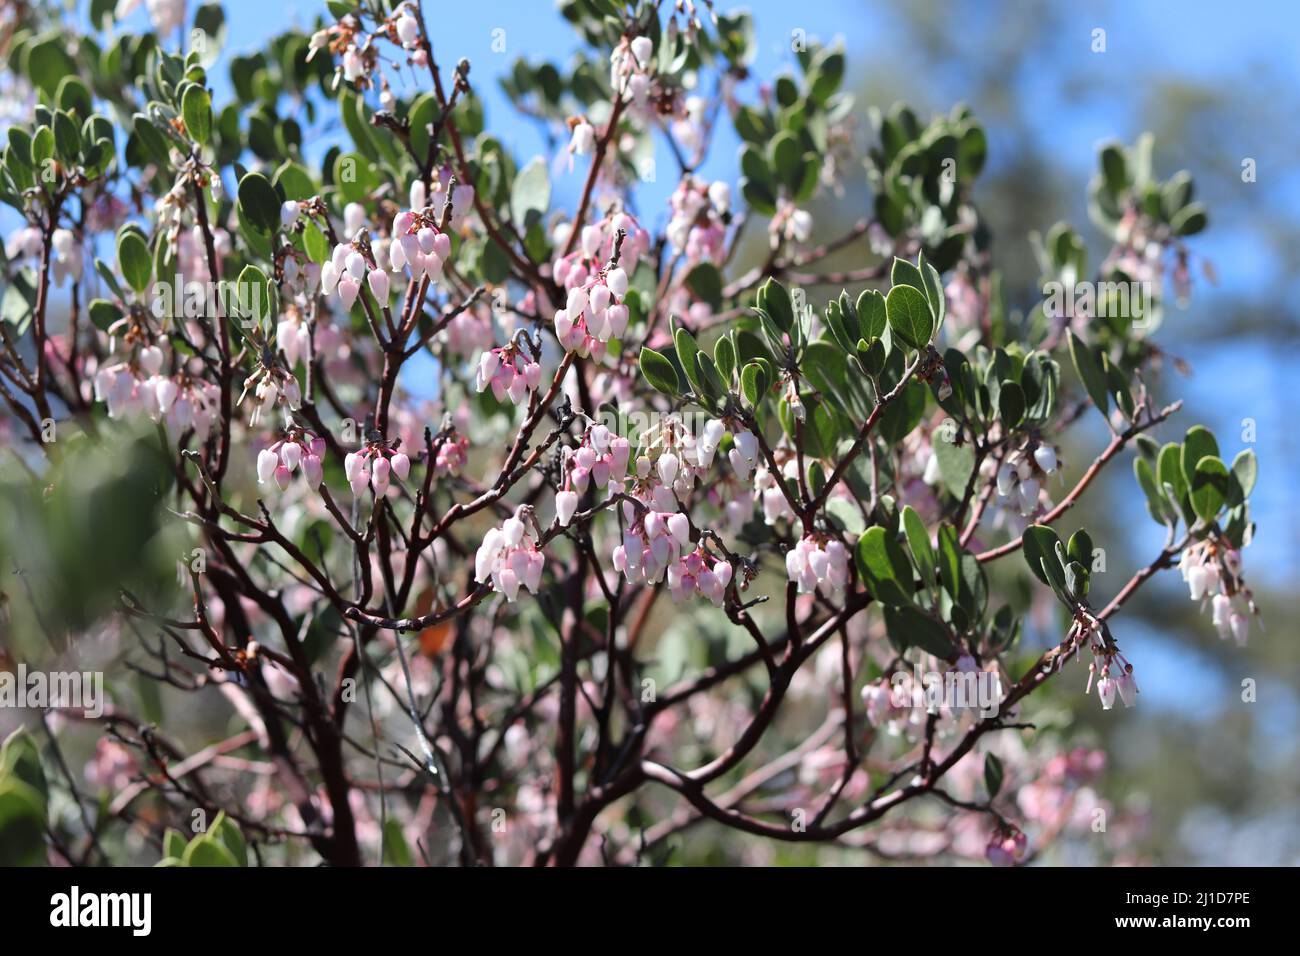 Close up of Manzanita or Arctostaphylos flowers at Rumsey Park in Payson, Arizona. Stock Photo